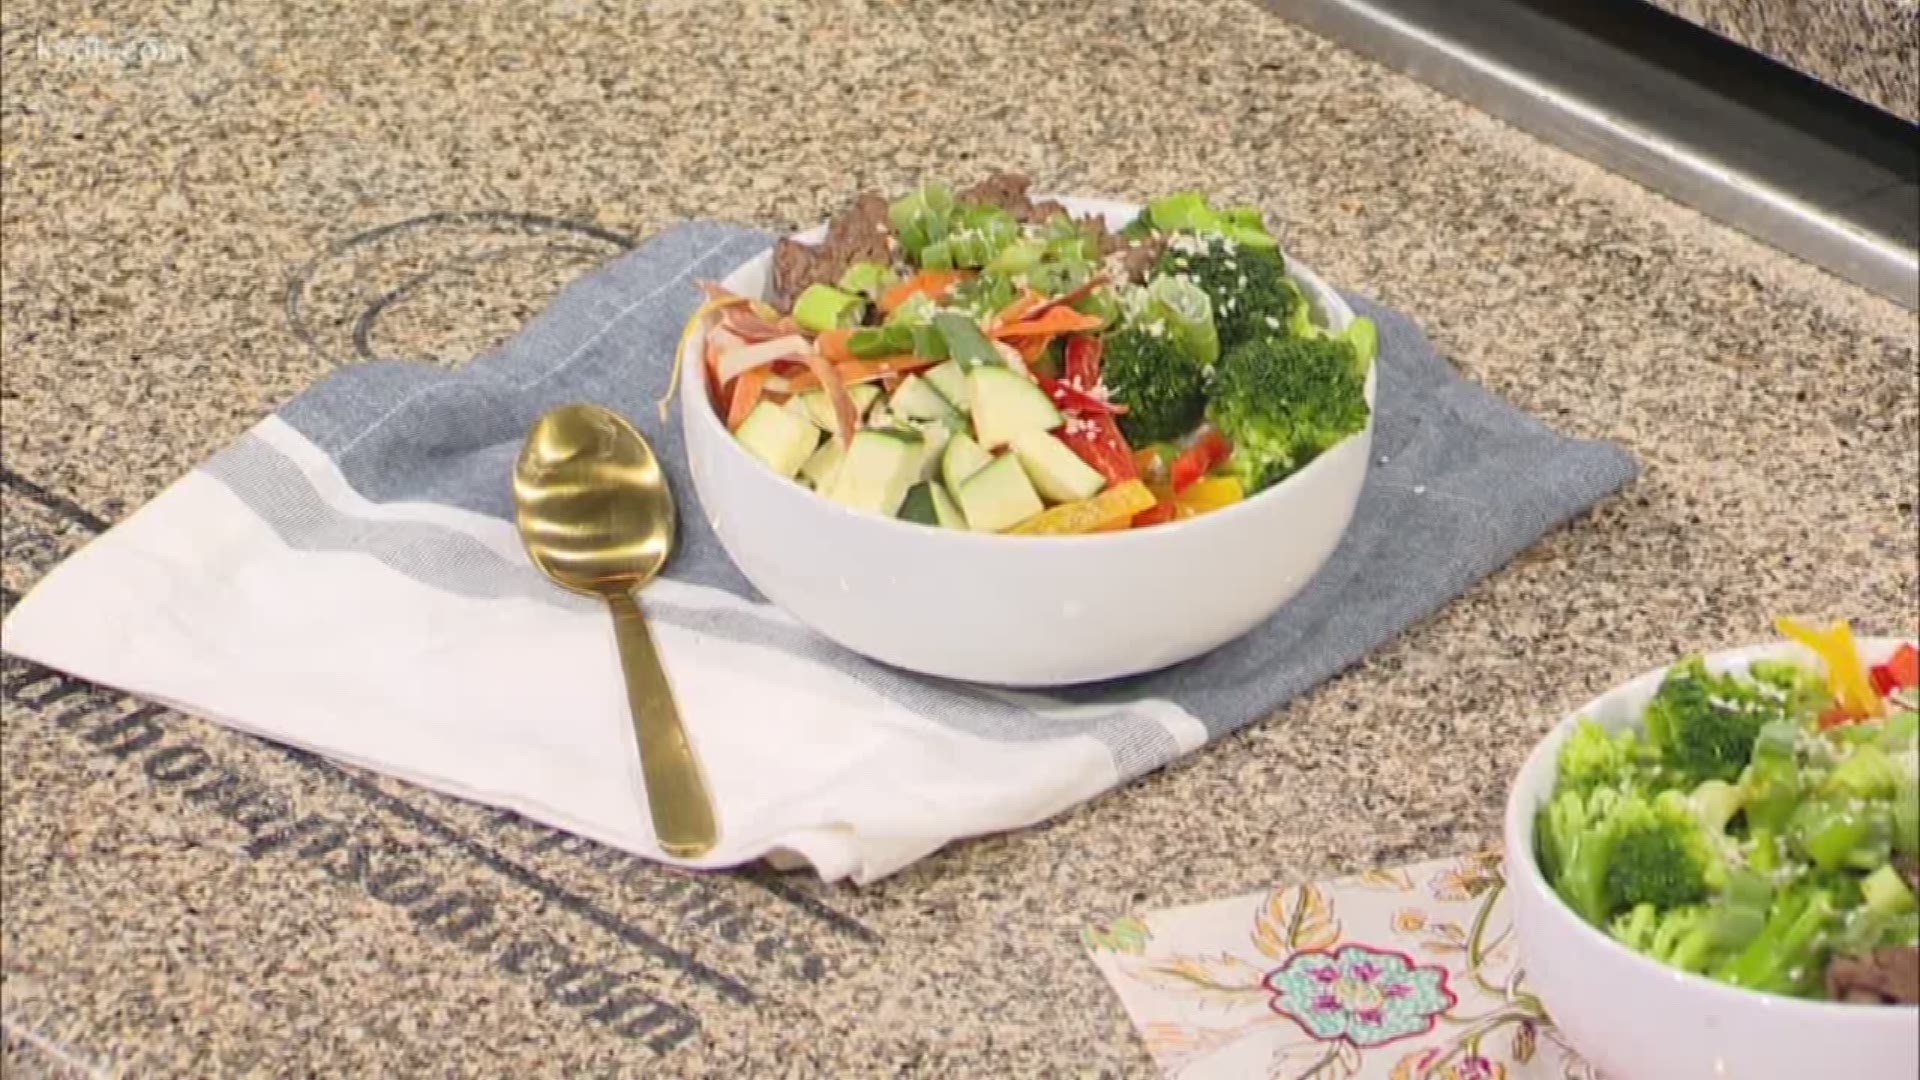 Chanala Rubenfeld of ‘Salads 2 Your Door’ shares a recipe for a One Pot Beef Bowl.